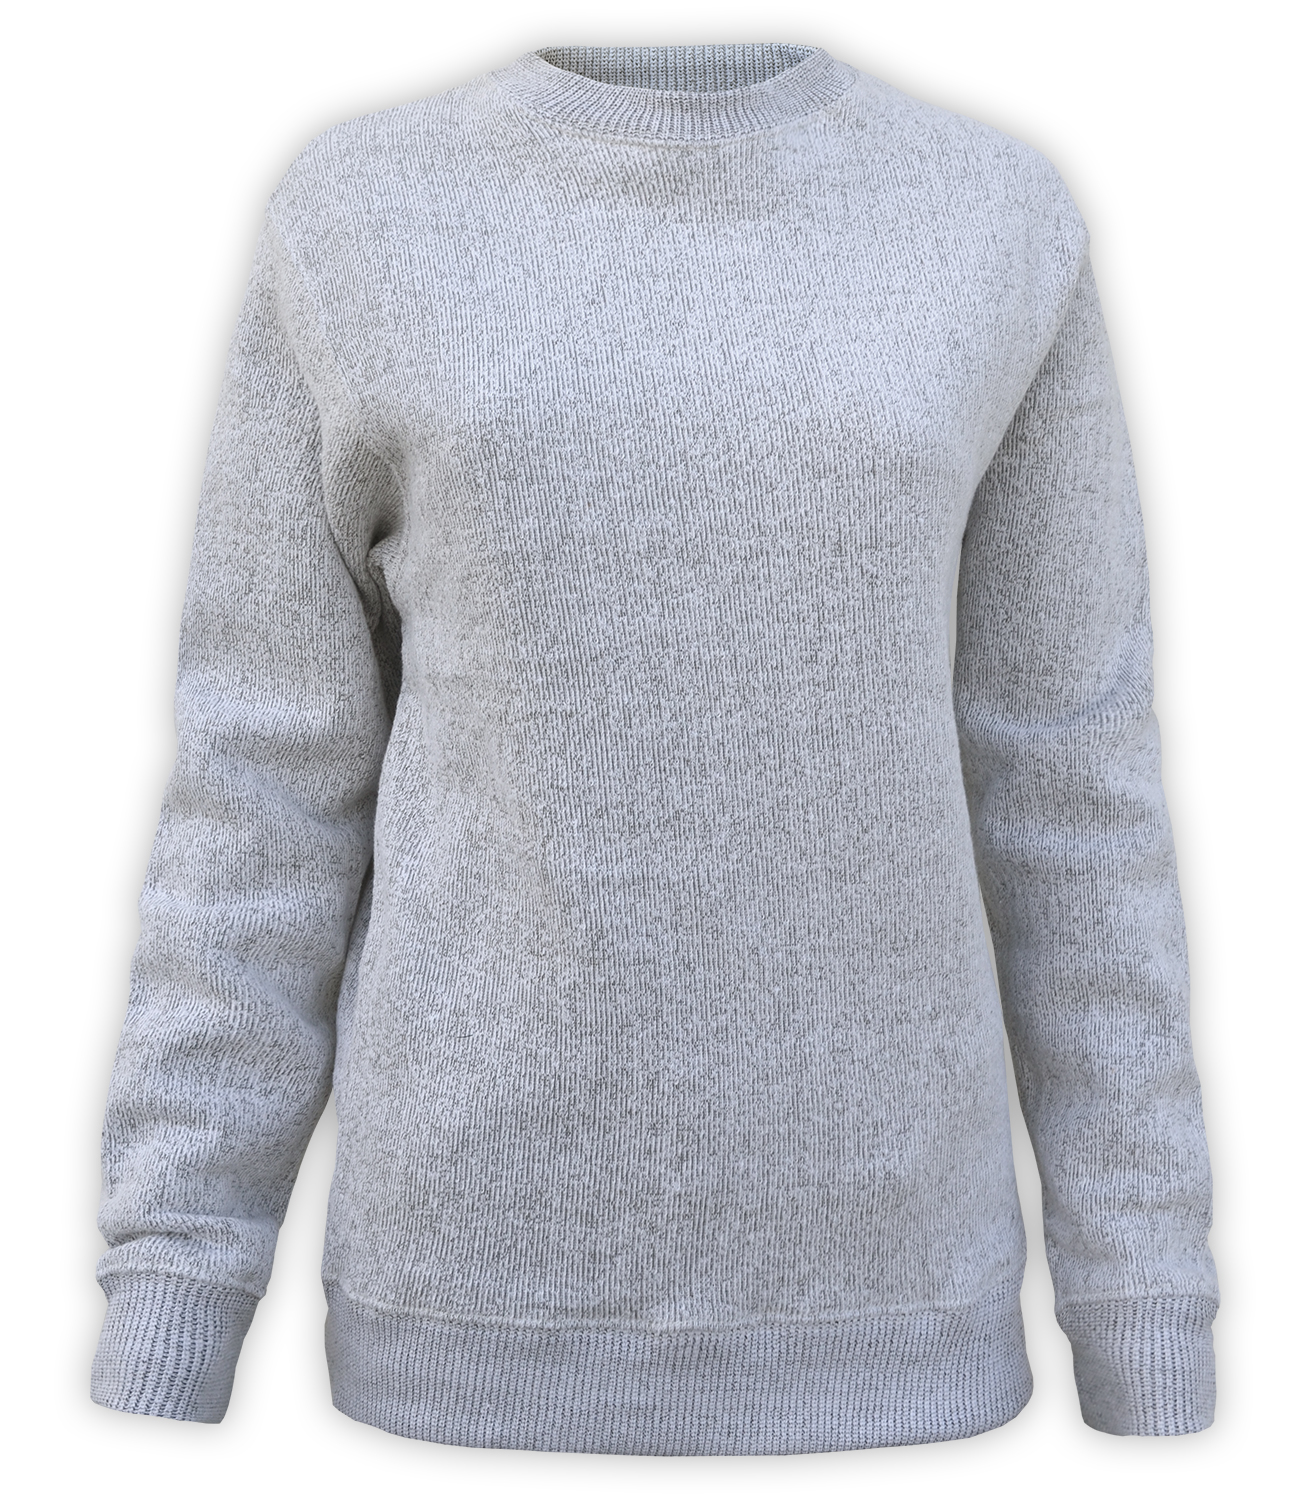 nantucket womens crewneck sweater for embroidery, blanks wholesale renegade club gray